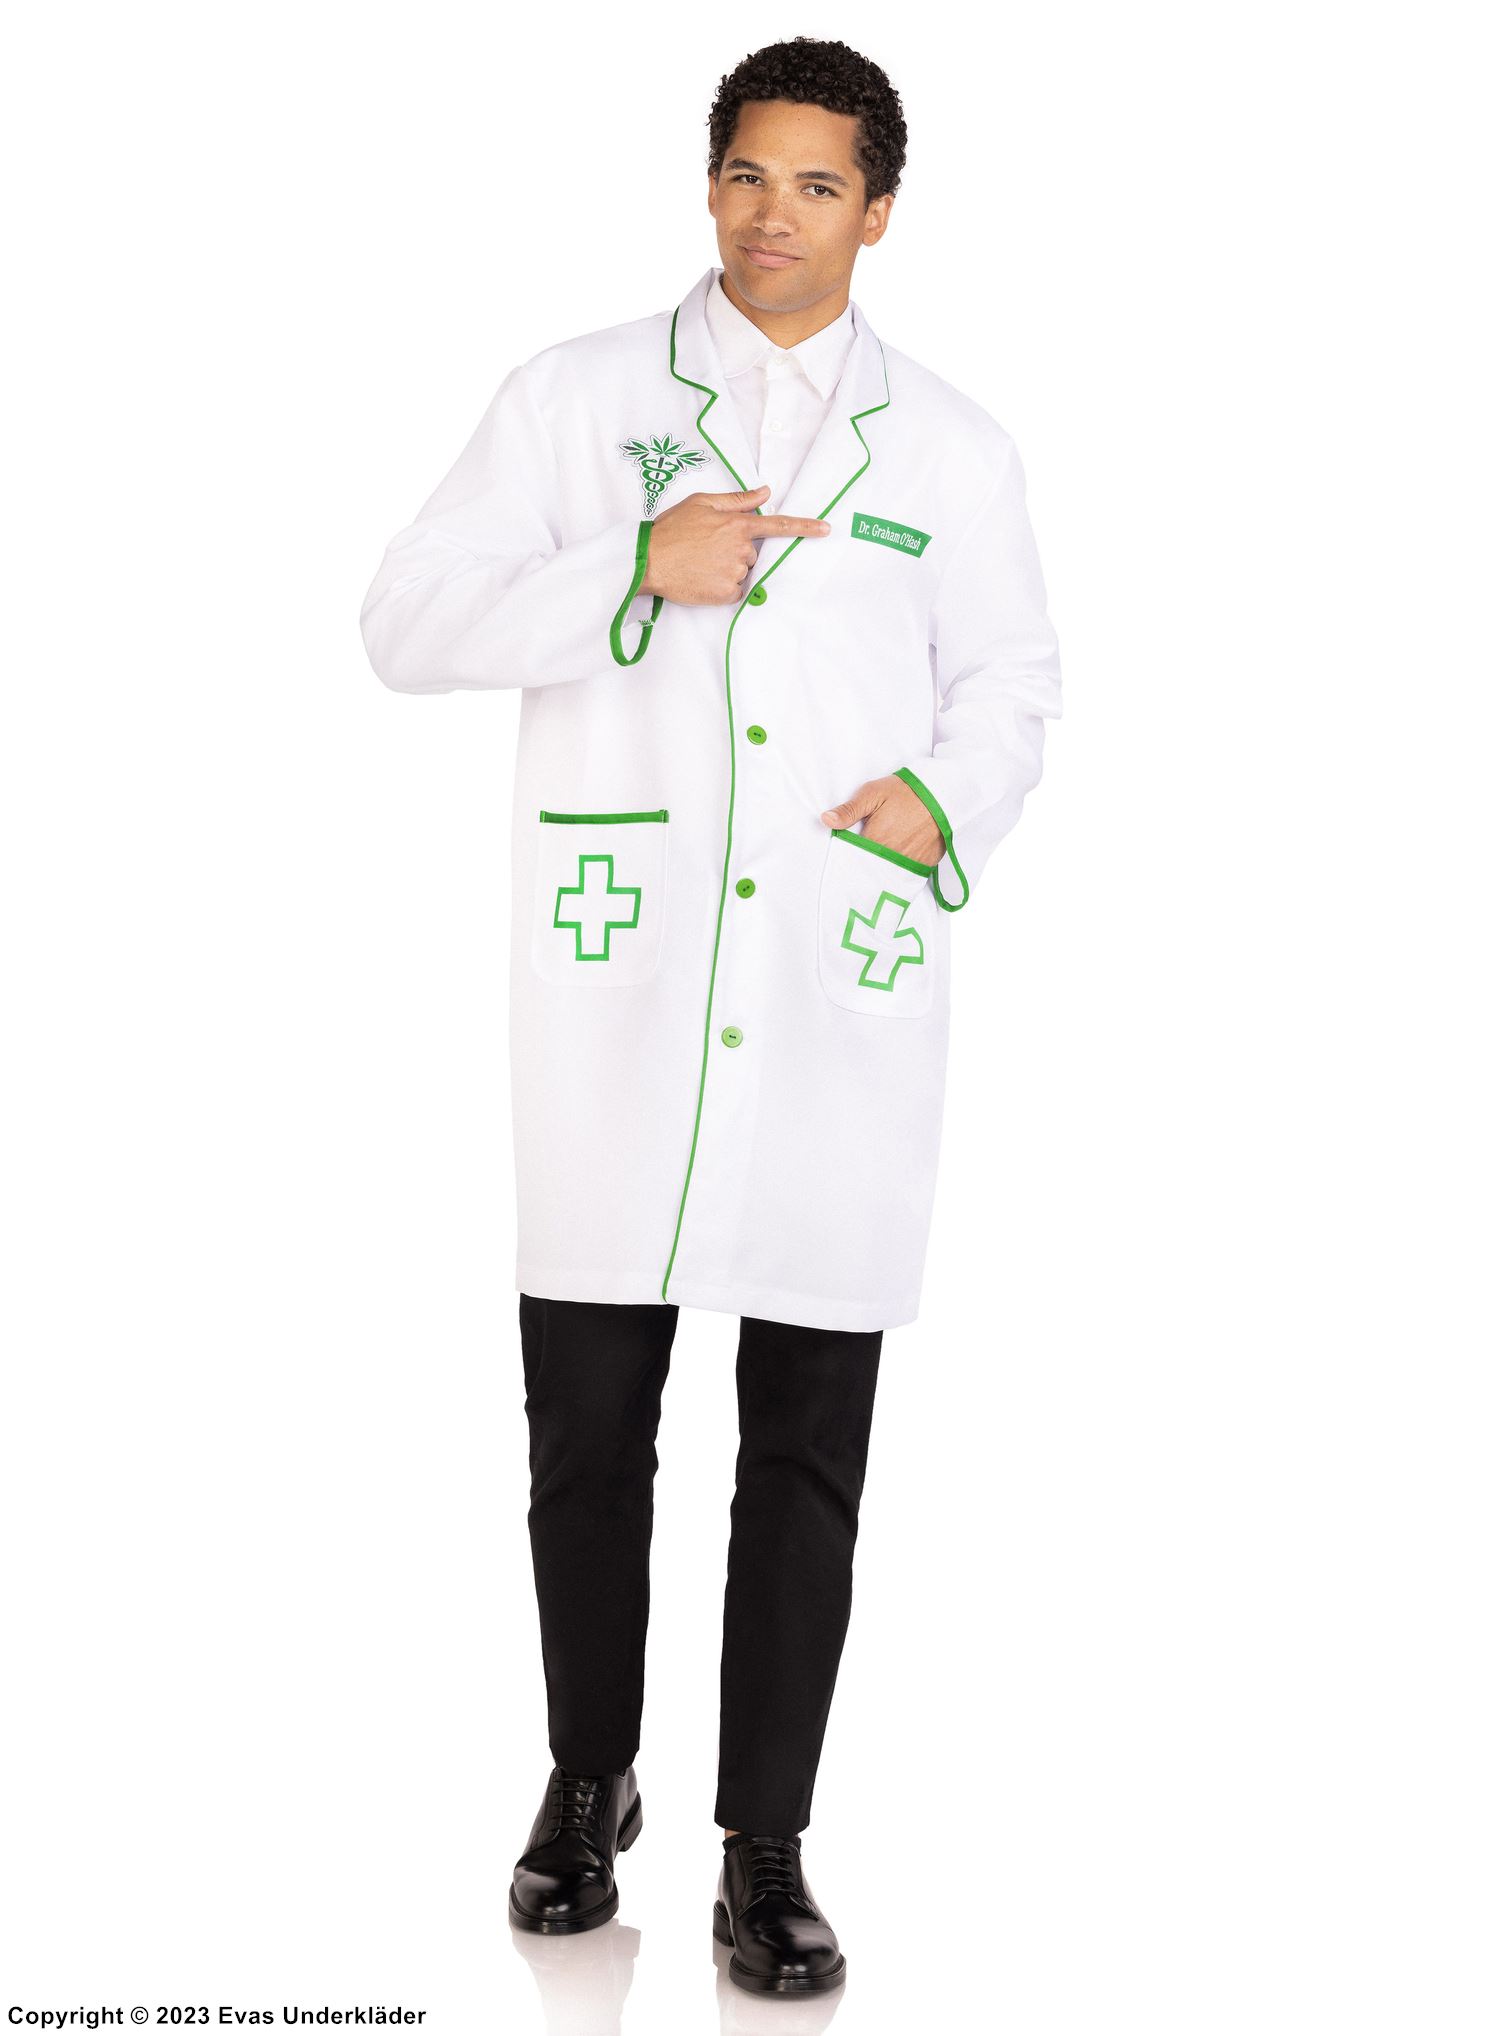 Doctor, costume jacket, long sleeves, pockets, buttons